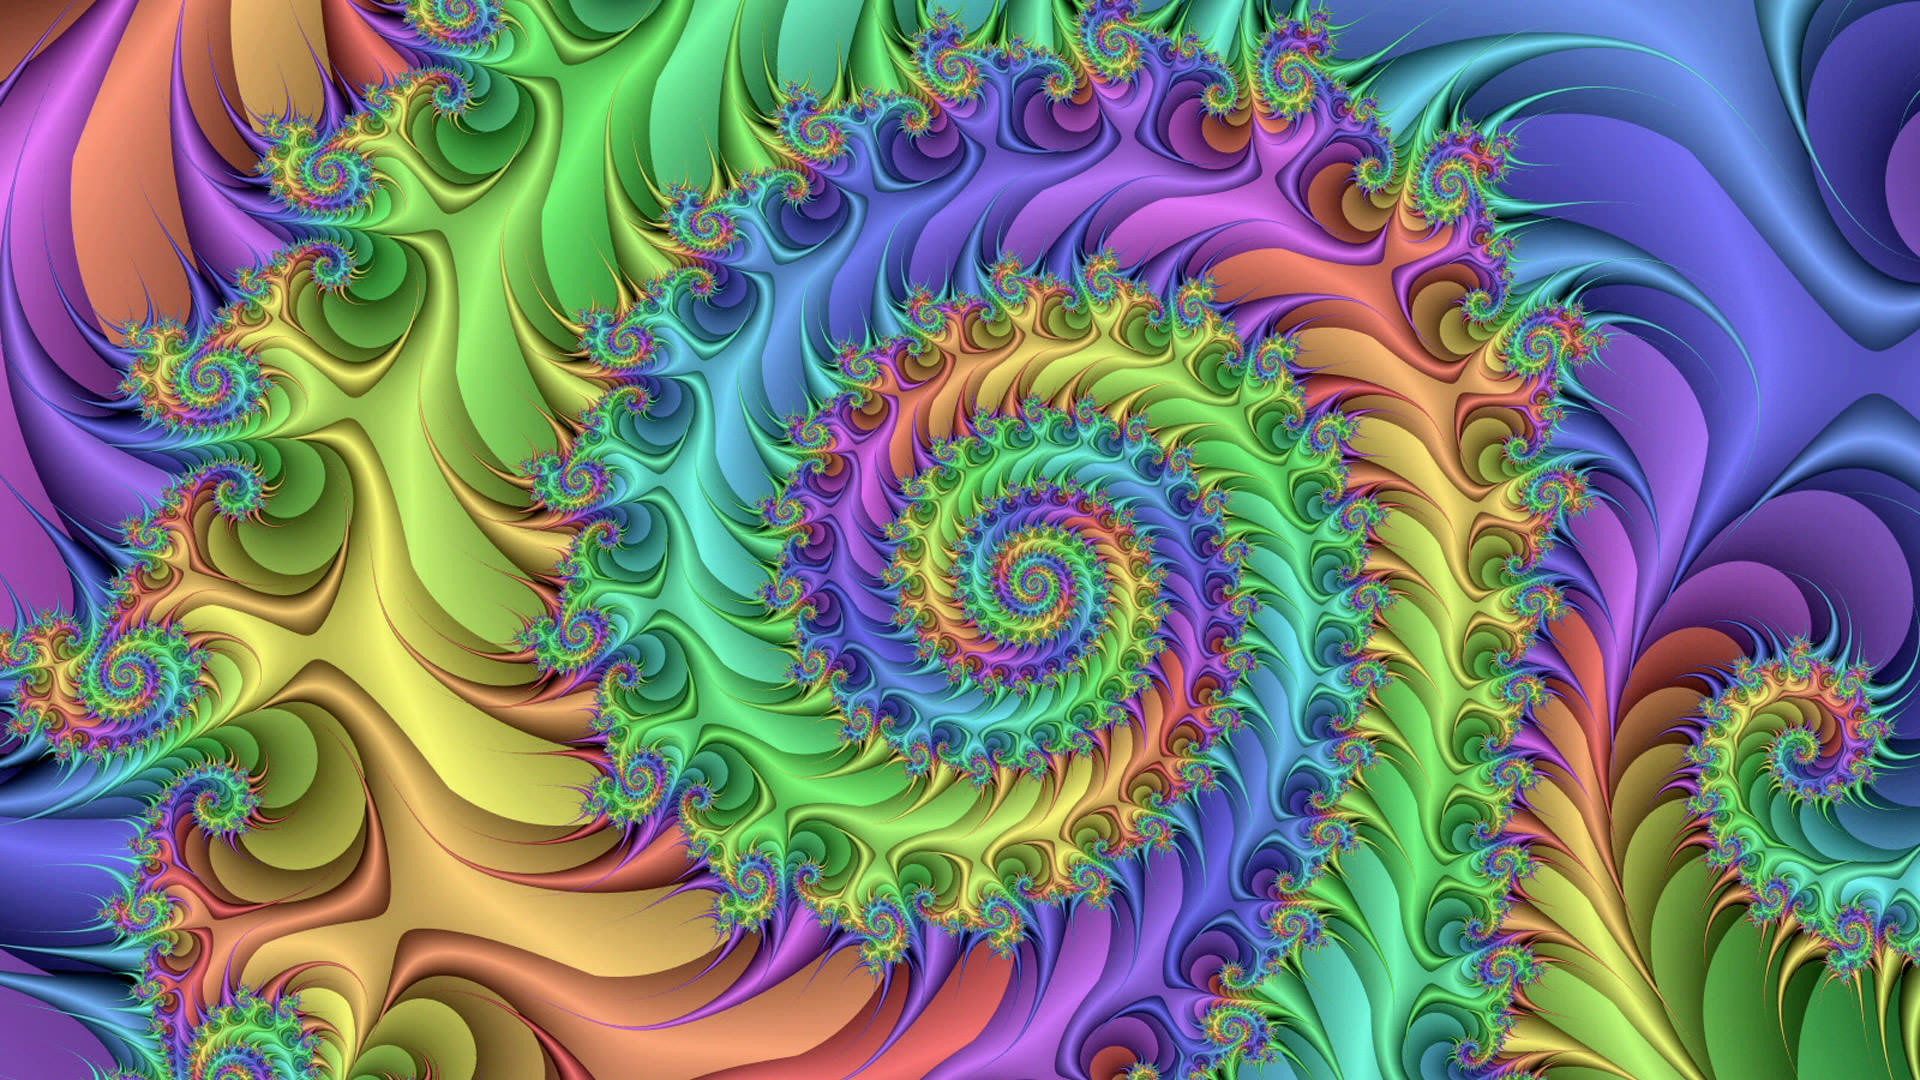 1920x1080 HQ Definition Psychedelic, by Luned Janic